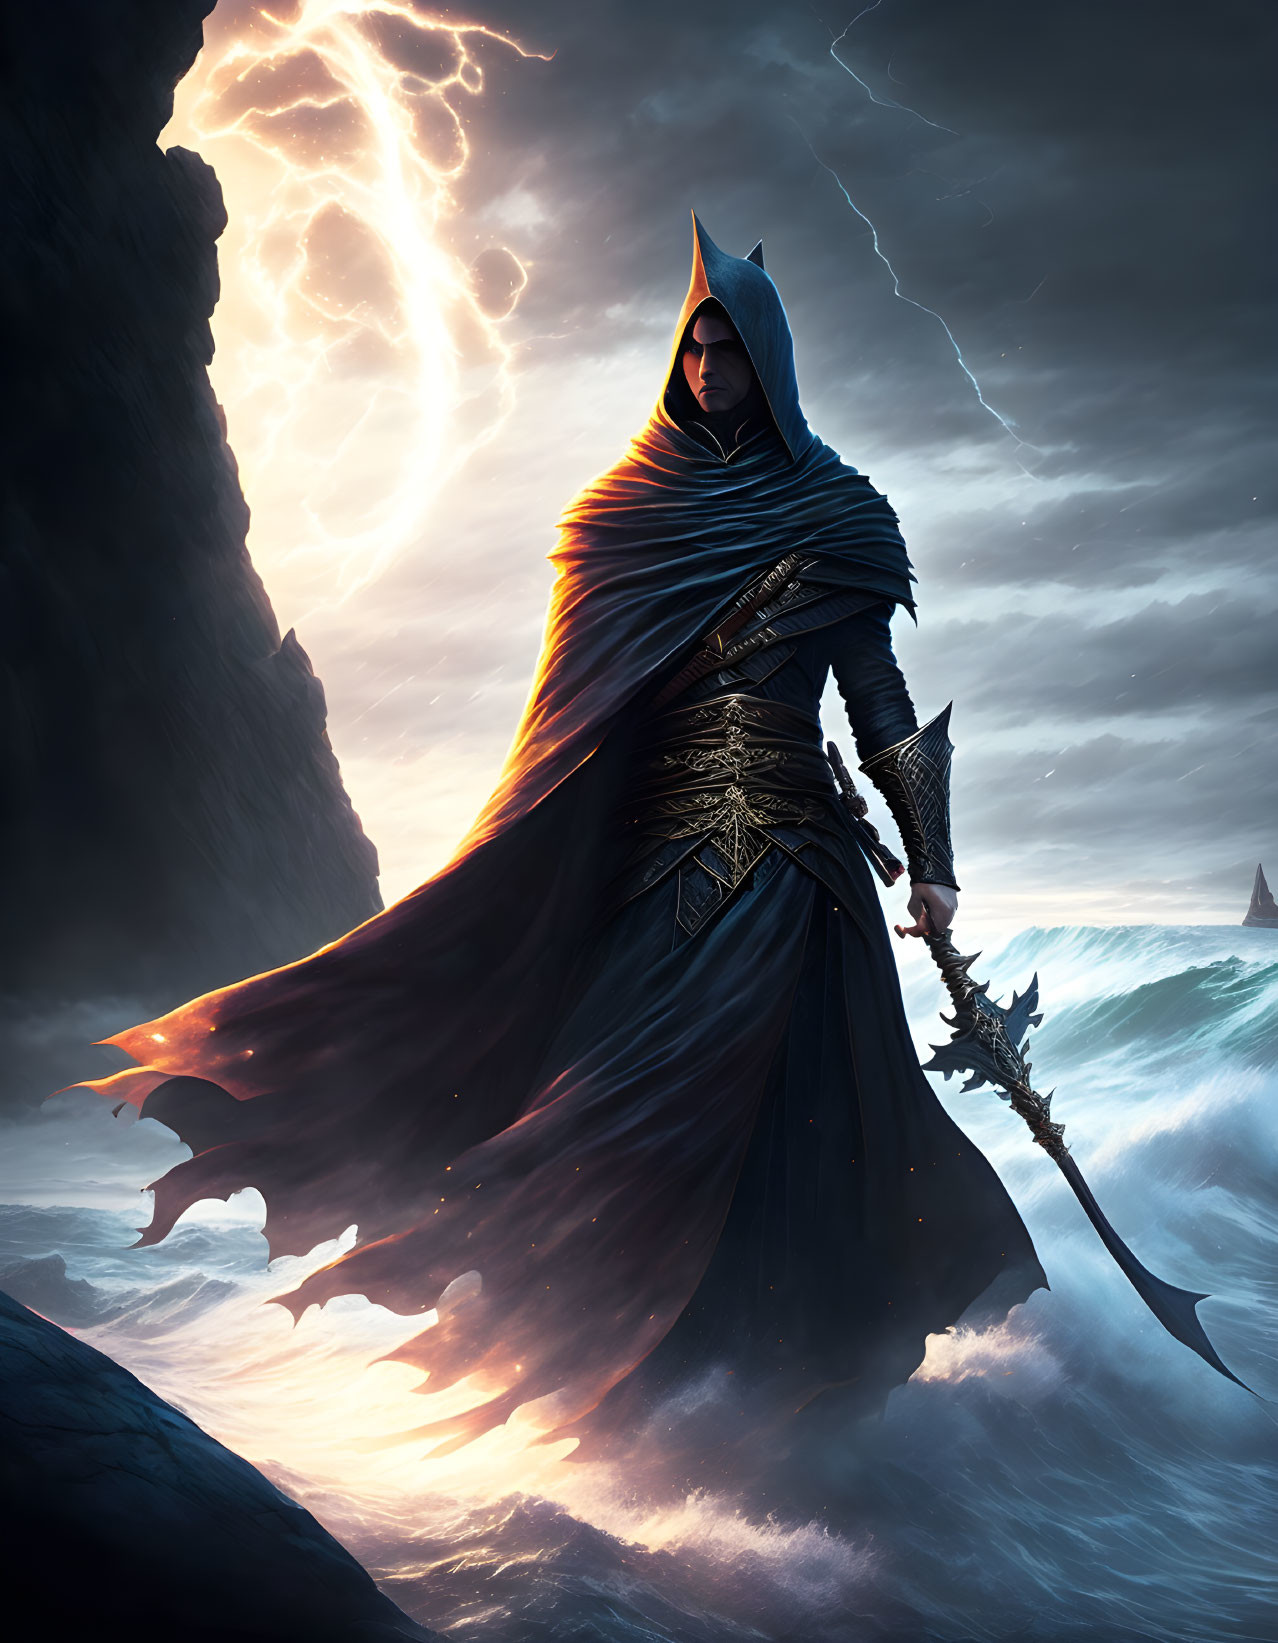 Hooded figure with jagged sword on cliff above stormy sea